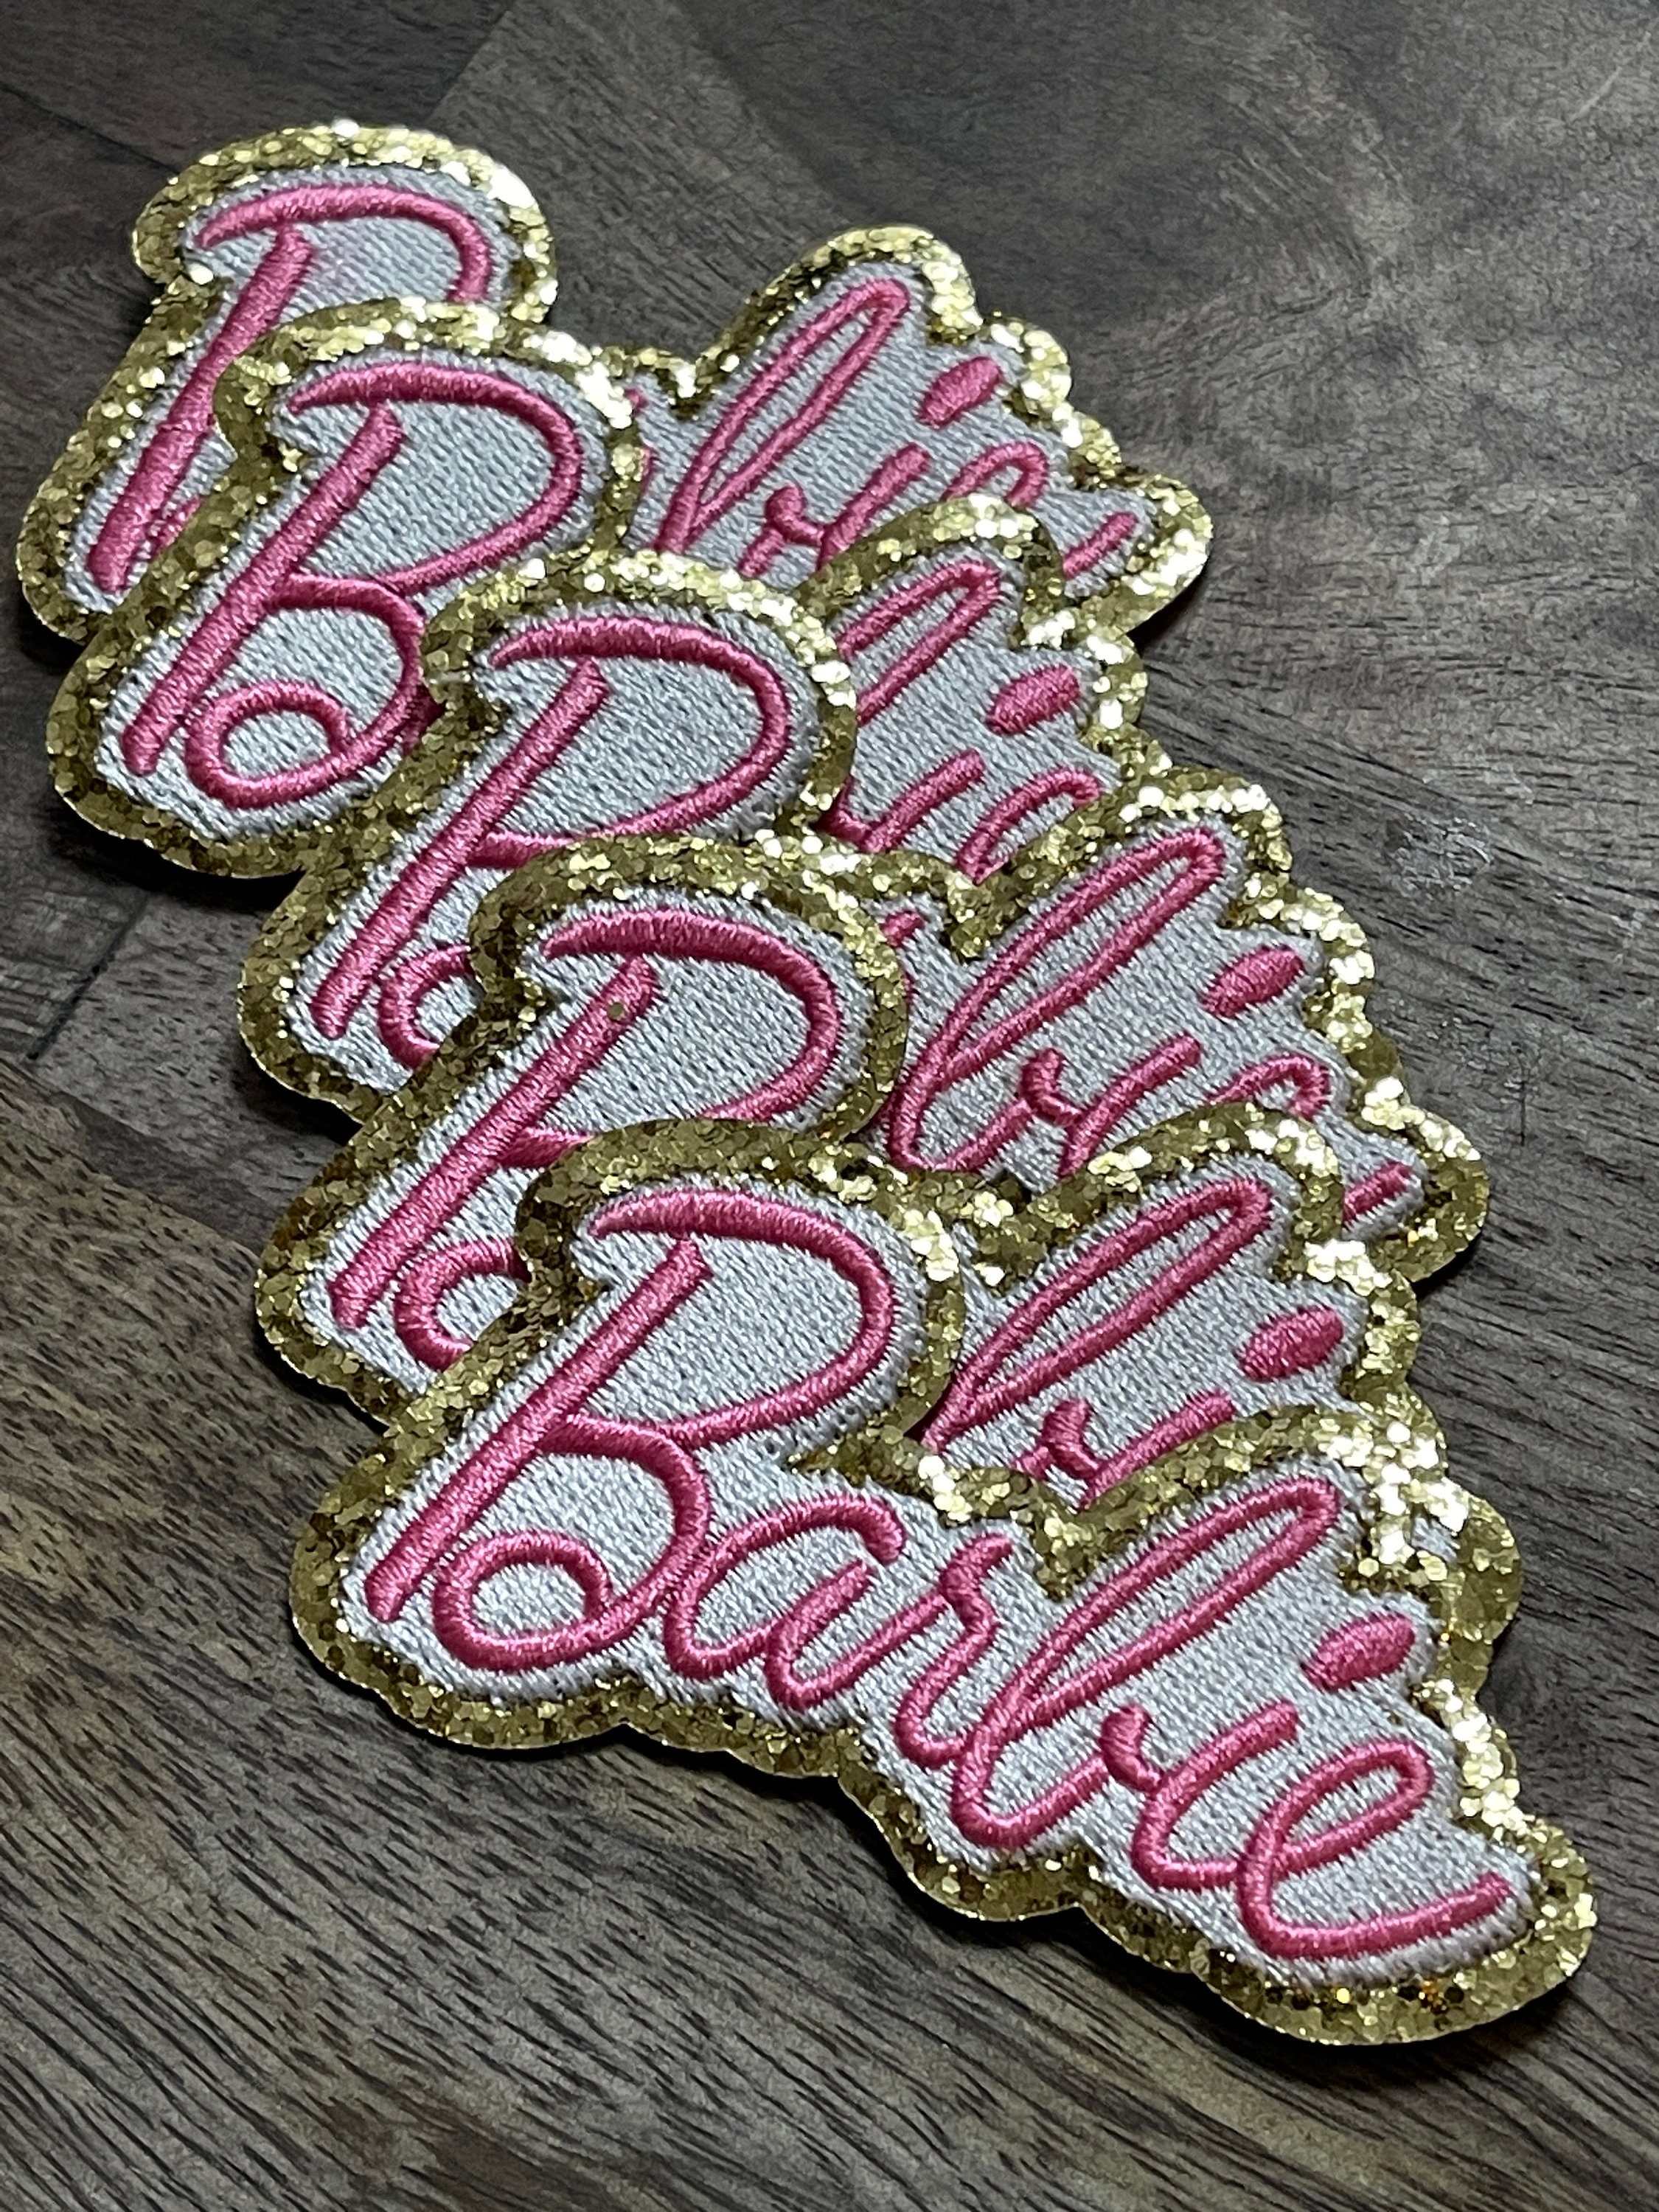 IRON ON Patch-Barbie logo Inspired-iron on patches-glitter-embroidered  patch-Barbie patch-barbie doll-pink-barbie party-Barbie costume-font , 1  PIECE